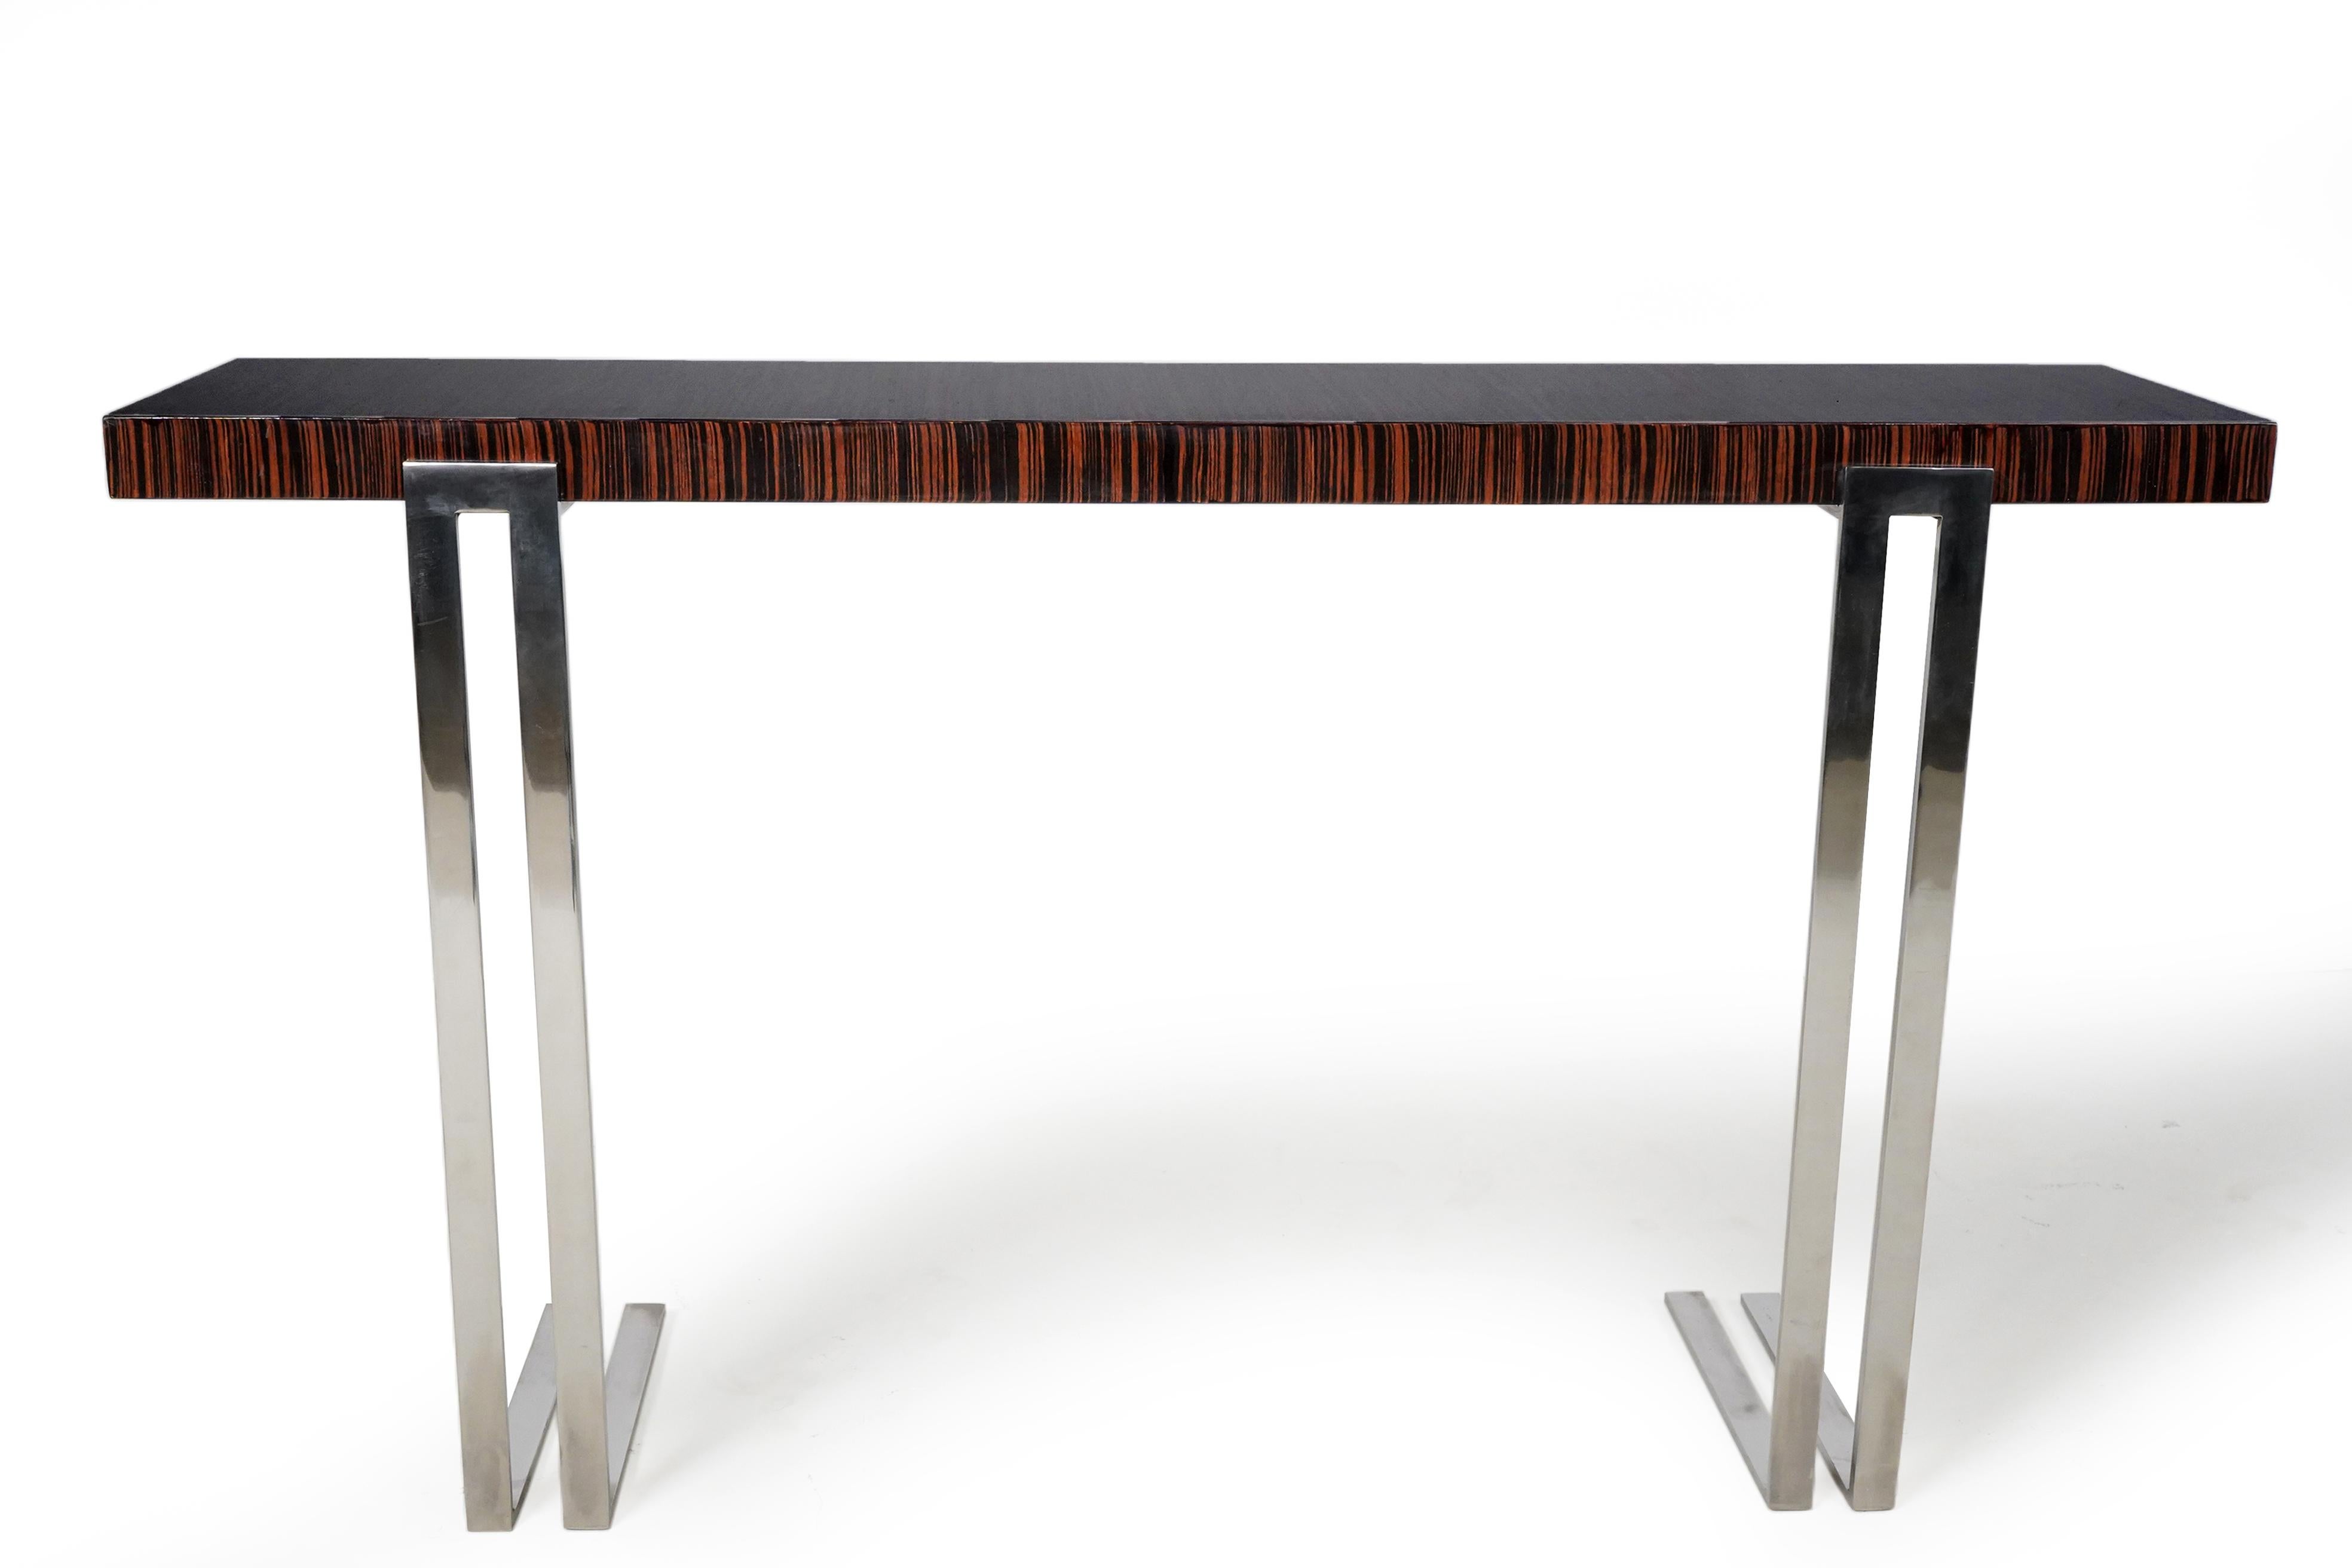 This slim console table features flawless palisander veneer laid front-to-back for artistic effect. The top slab is mounted on solid steel legs that are chrome-plated. The piece is fitted with clips on the back that attach to the wall. Without rear